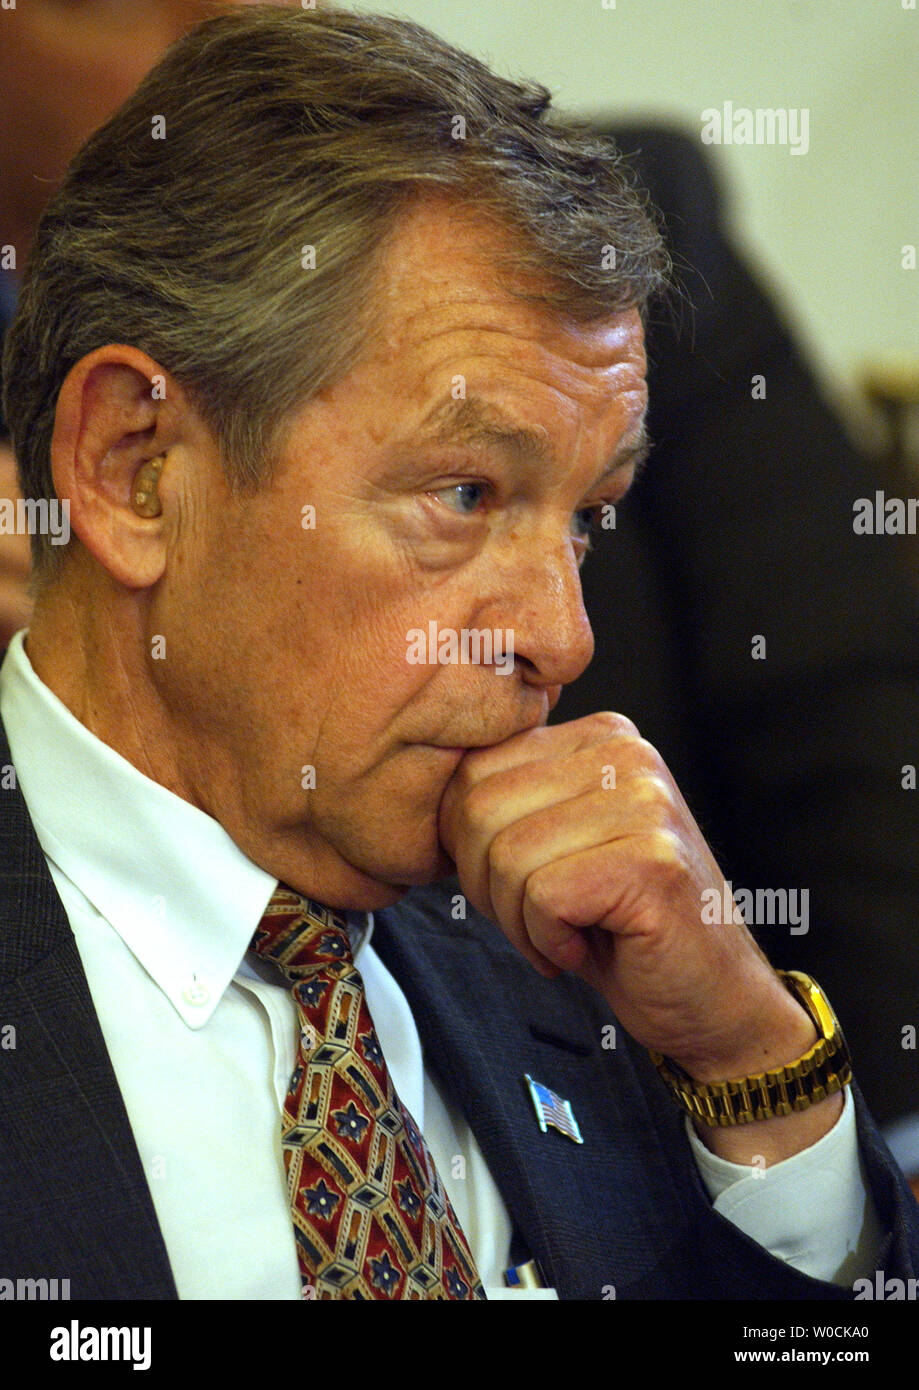 Sen. George Voinovich, R-Ohio, participates in the Senate Foreign Relations Committee meeting which was held to vote on John Bolton to be U.S. Ambassador to the United Nations on Capitol Hill in Washington on April 19, 2005. The committee chose to delay the vote after Sens. Chuck Hagel, R-Neb. and George Voinovich, R-Ohio, expressed concern allegations against him.   (UPI Photo/Roger L. Wollenberg) Stock Photo